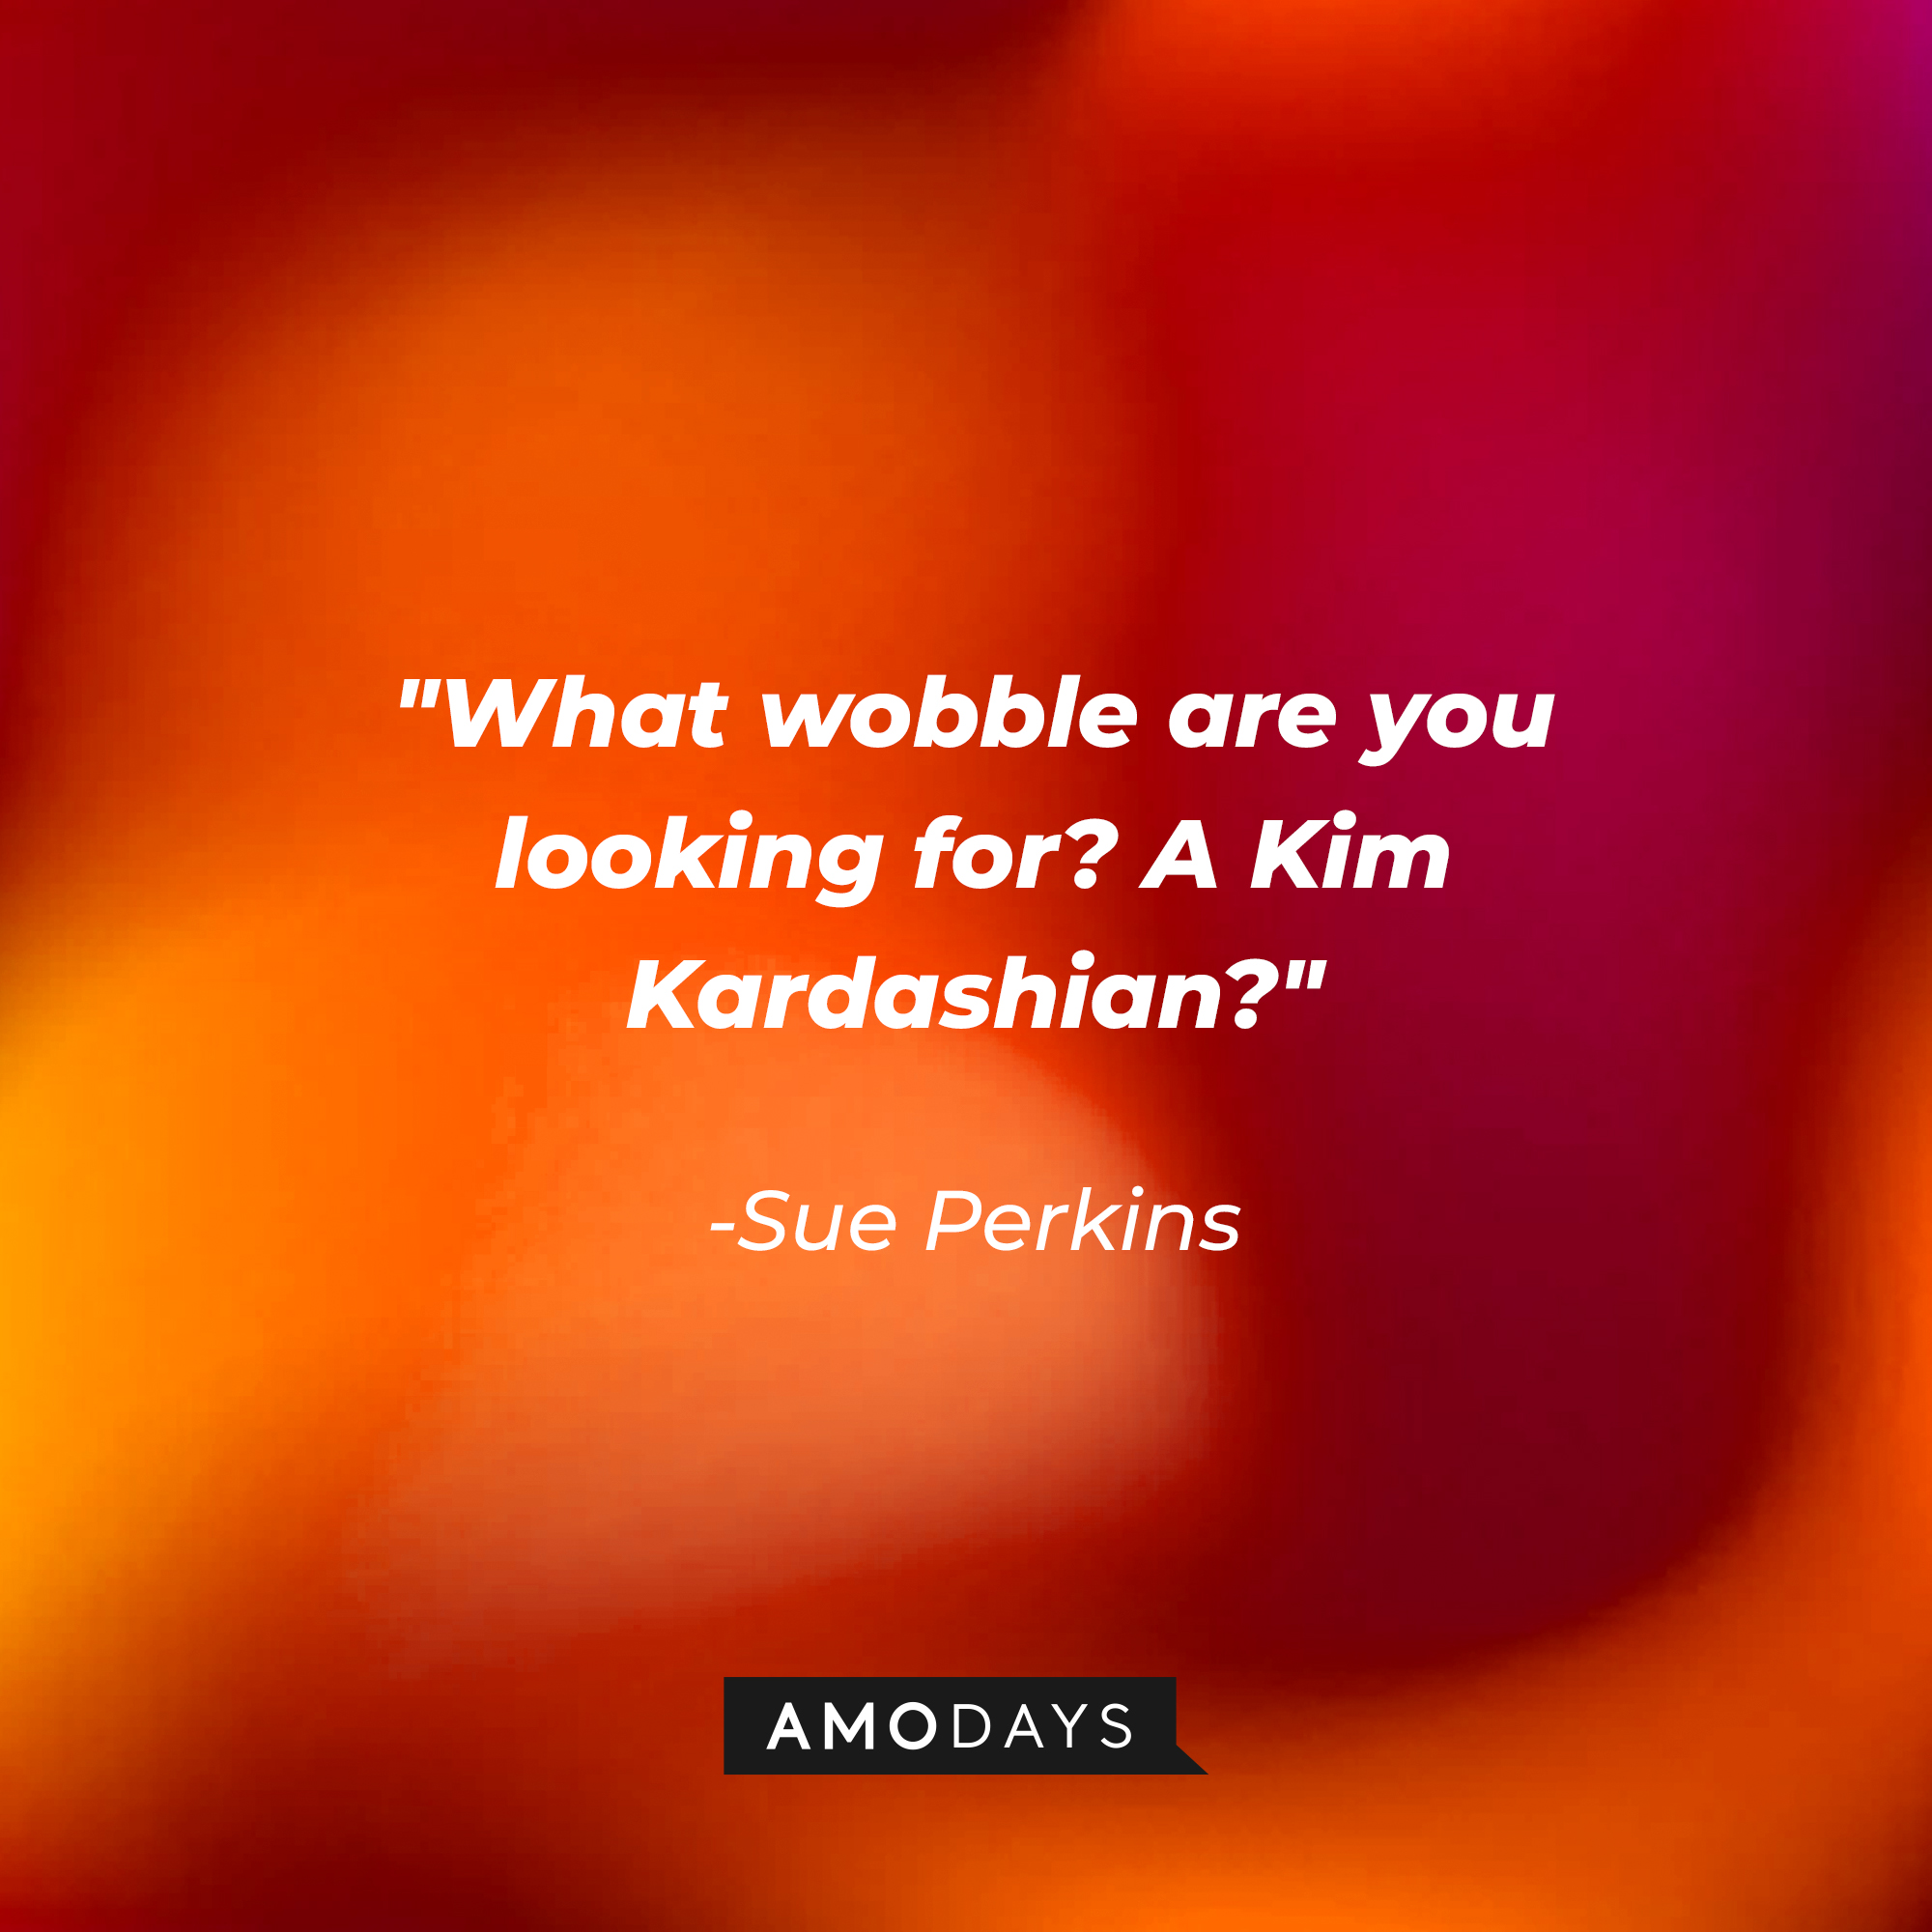 Sue Perkins' quote: "What wobble are you looking for? A Kim Kardashian?" | Image: AmoDays